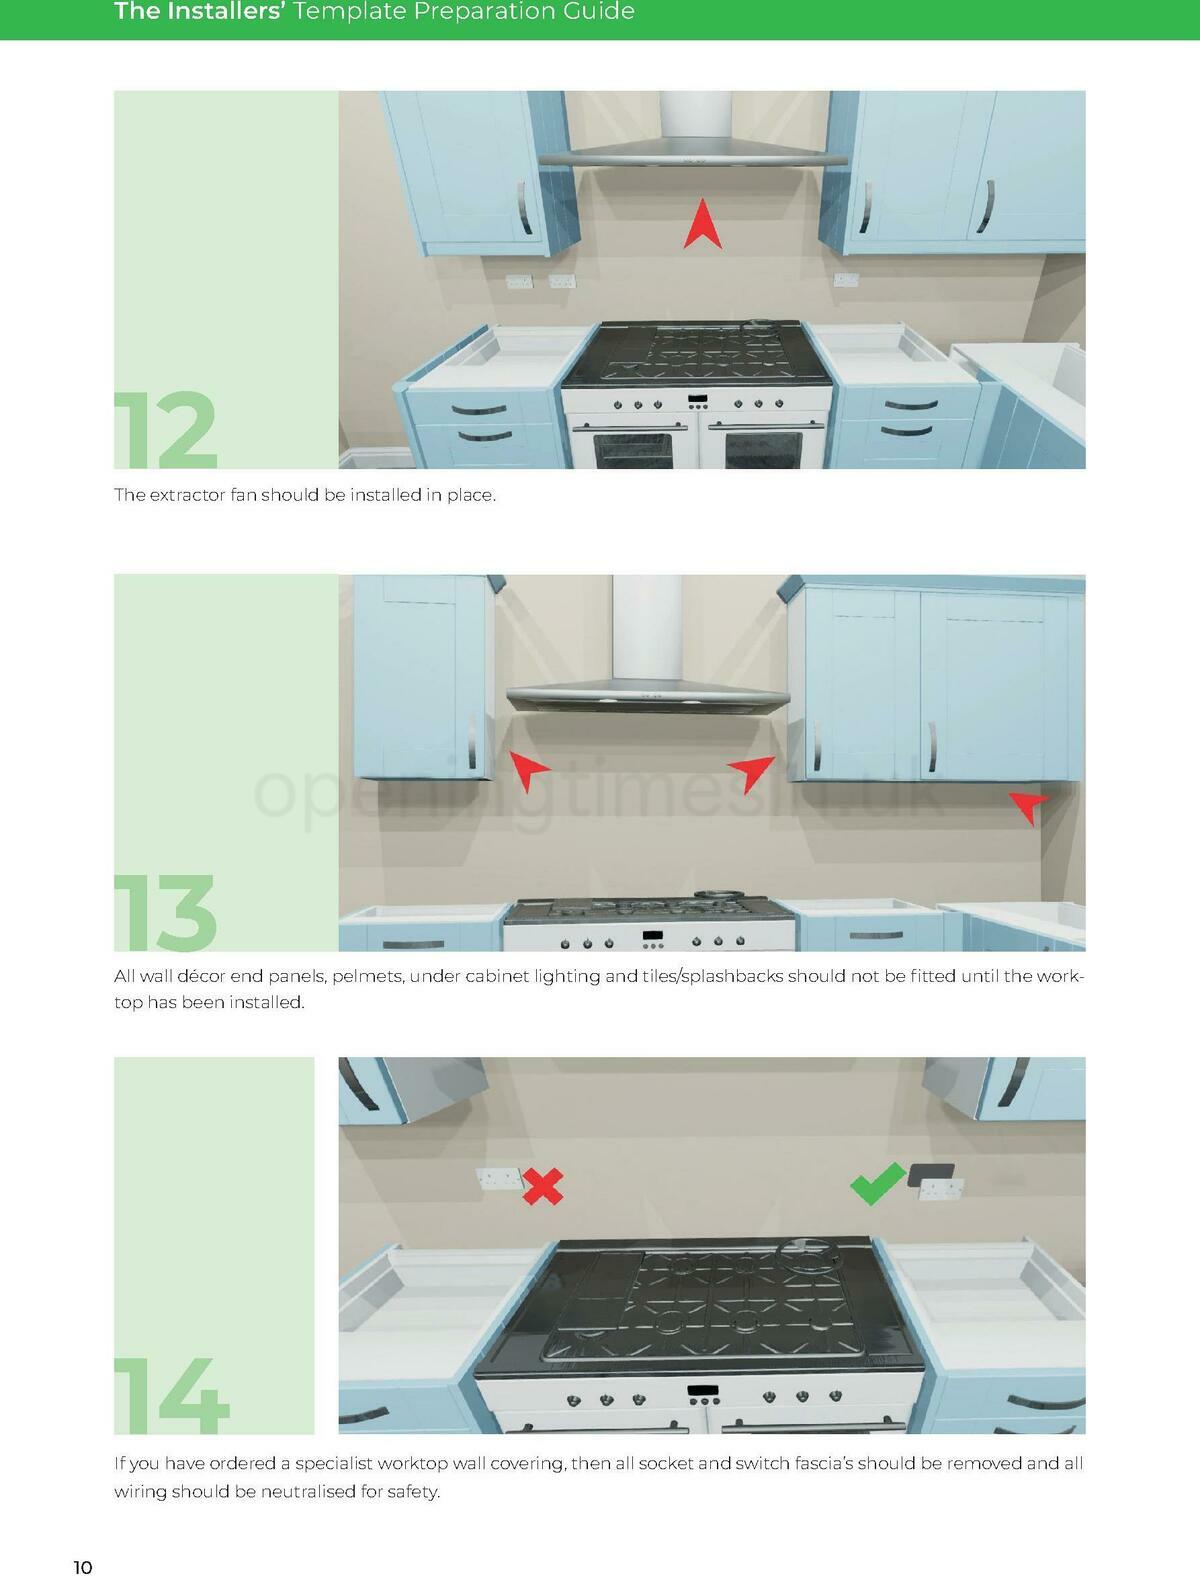 Wren Kitchens Prep Guide Template Offers from 26 October